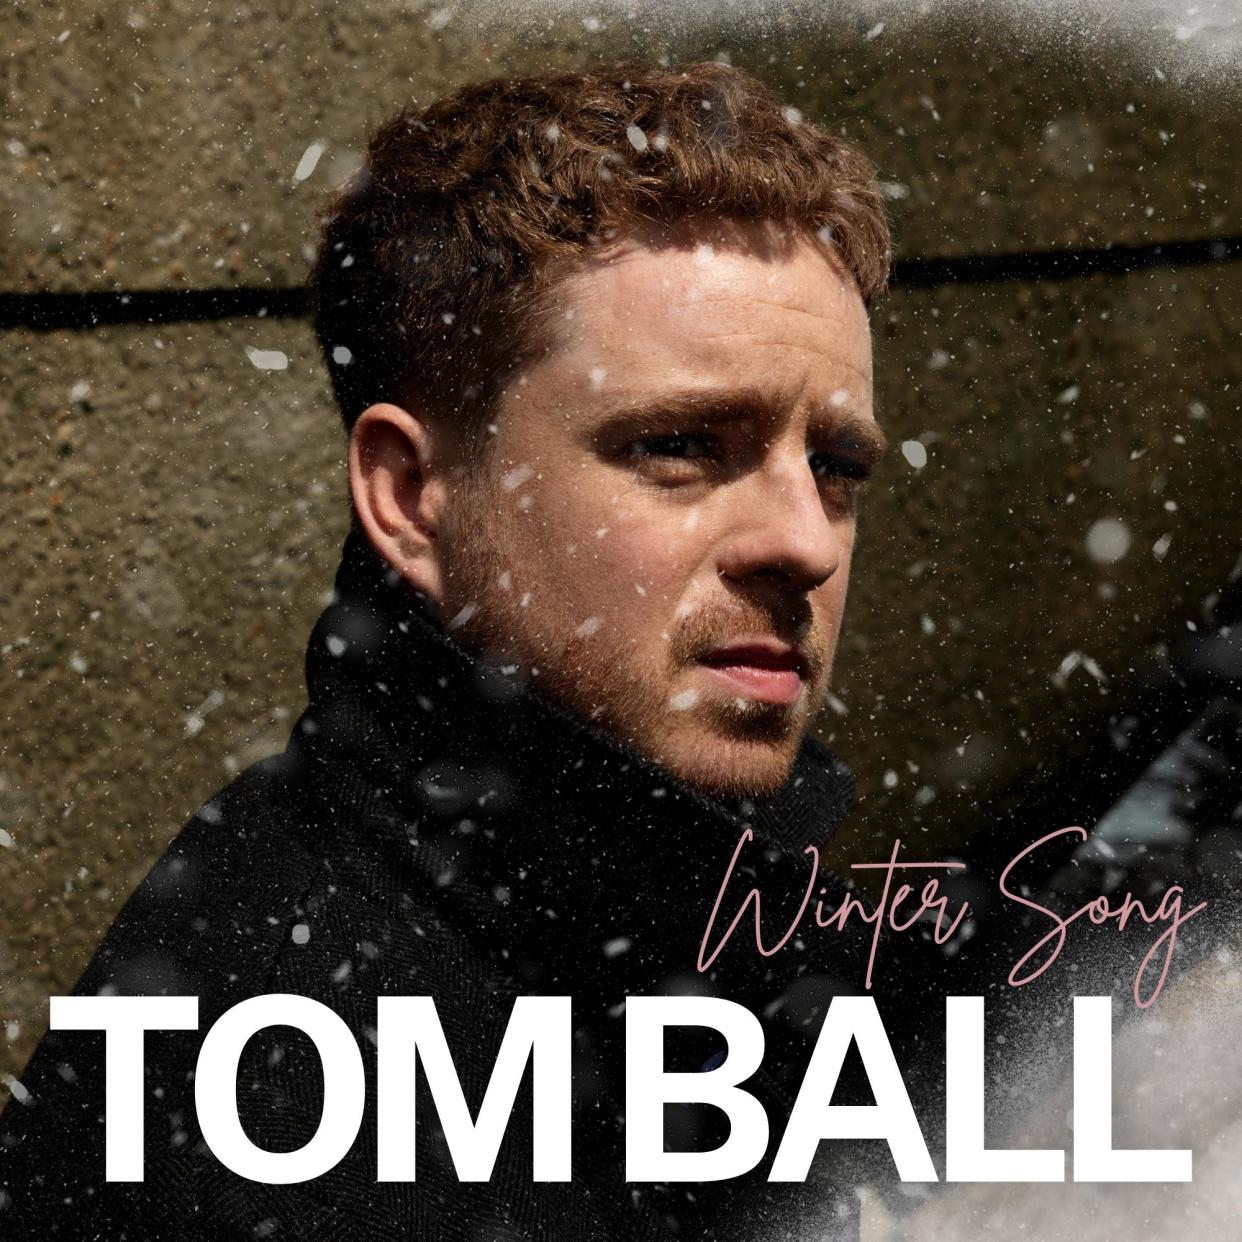 Tom Ball's Winter Song is out now. 